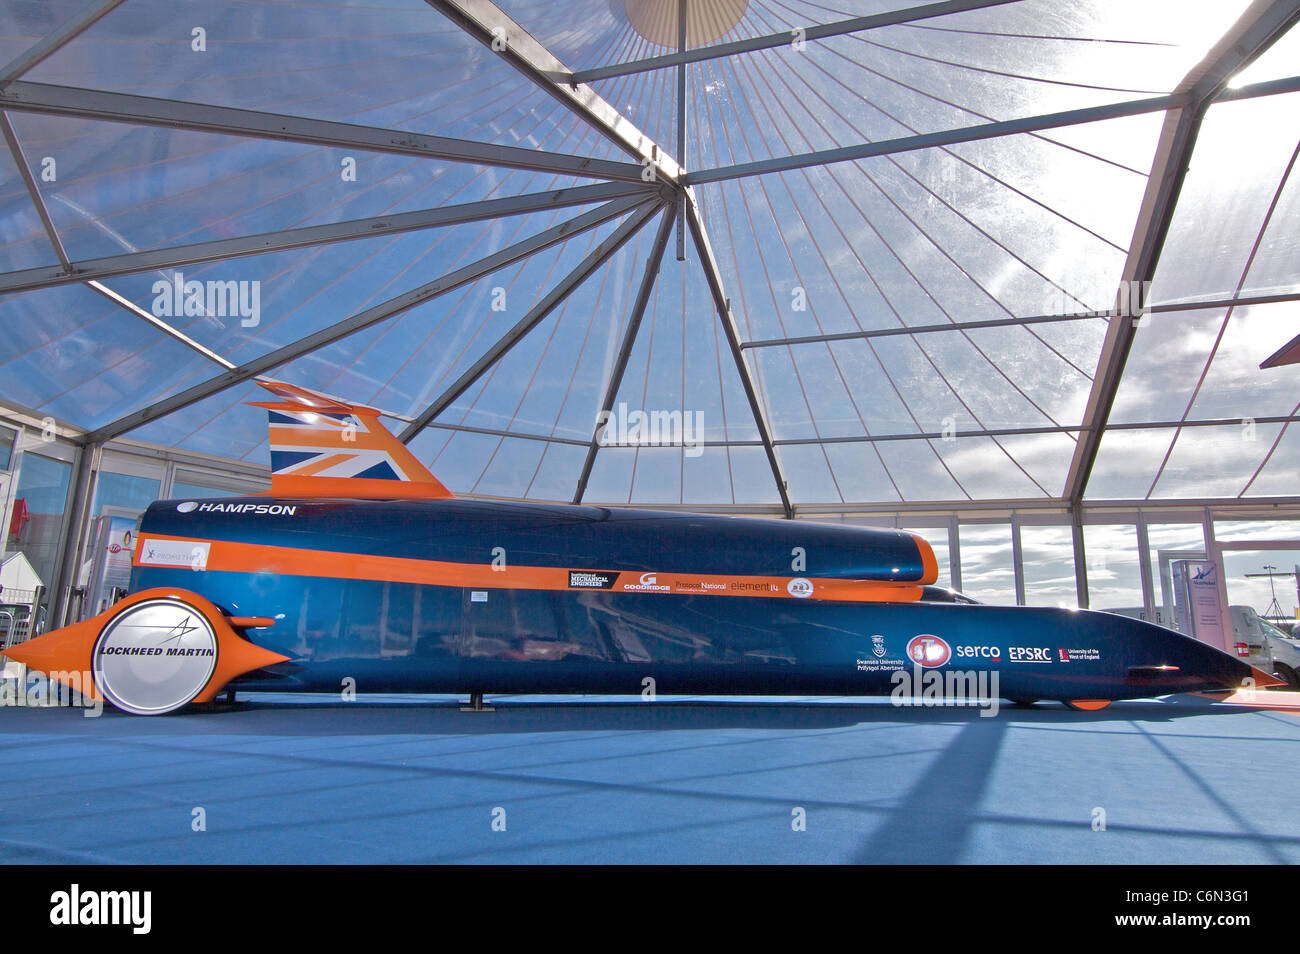 Bloodhound SuperSonic Car The British team hoping to drive a car faster than 1,000mph has unveiled a full-scale model of the Stock Photo